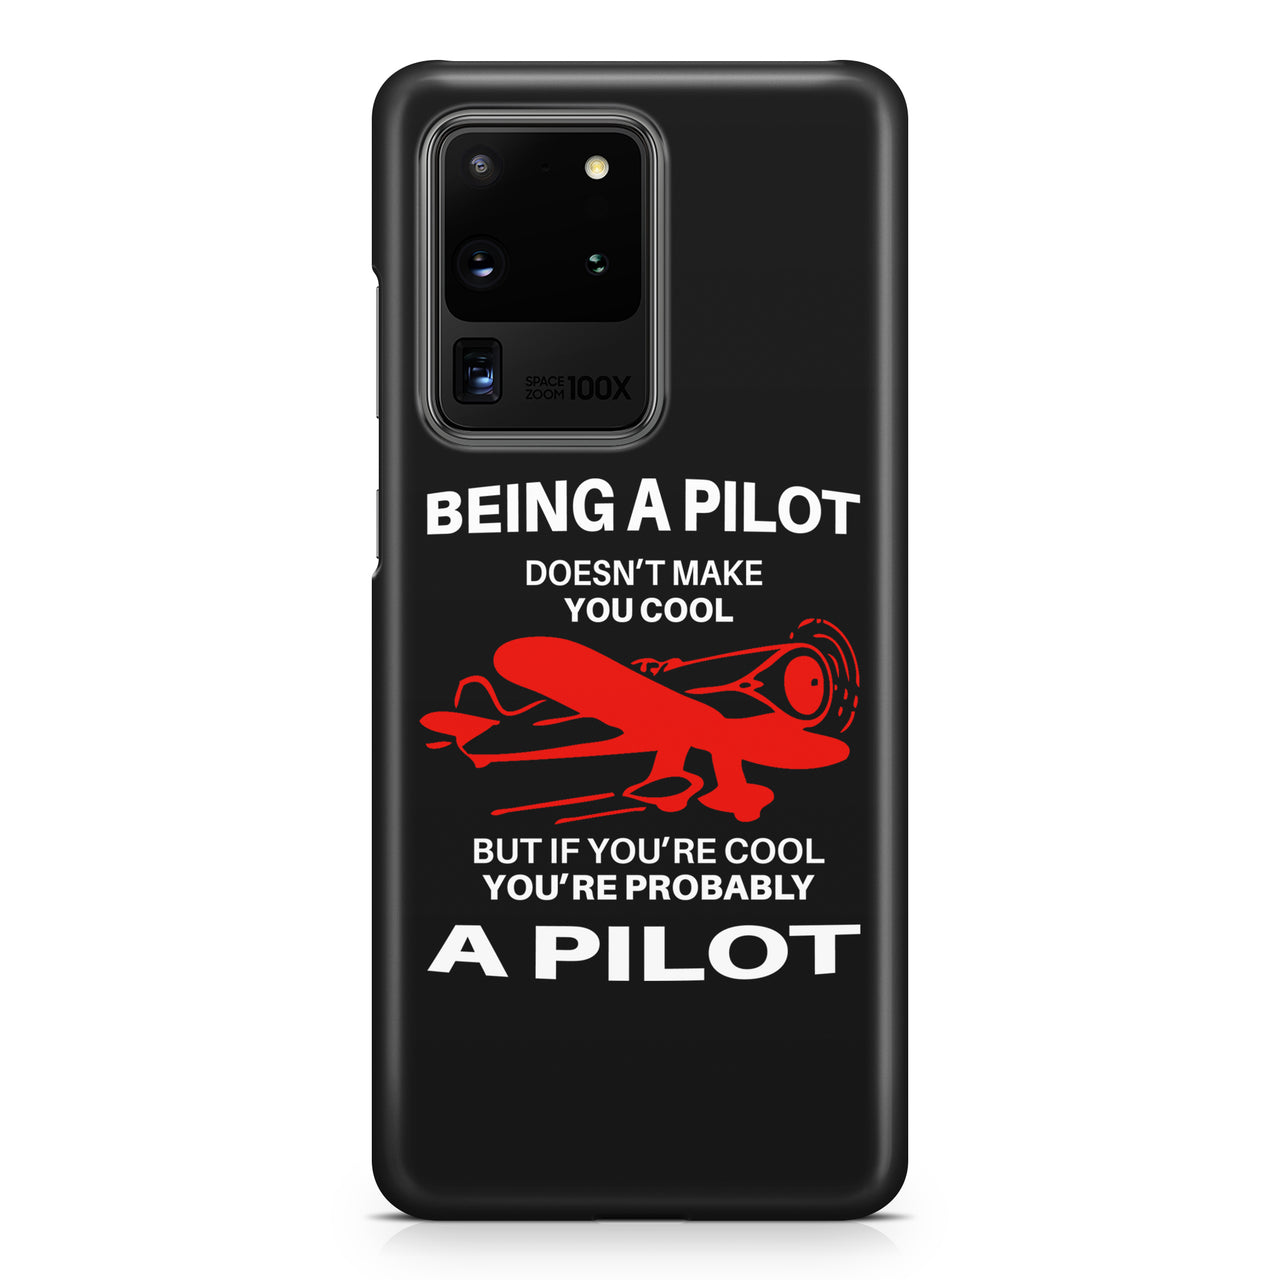 If You're Cool You're Probably a Pilot Samsung A Cases